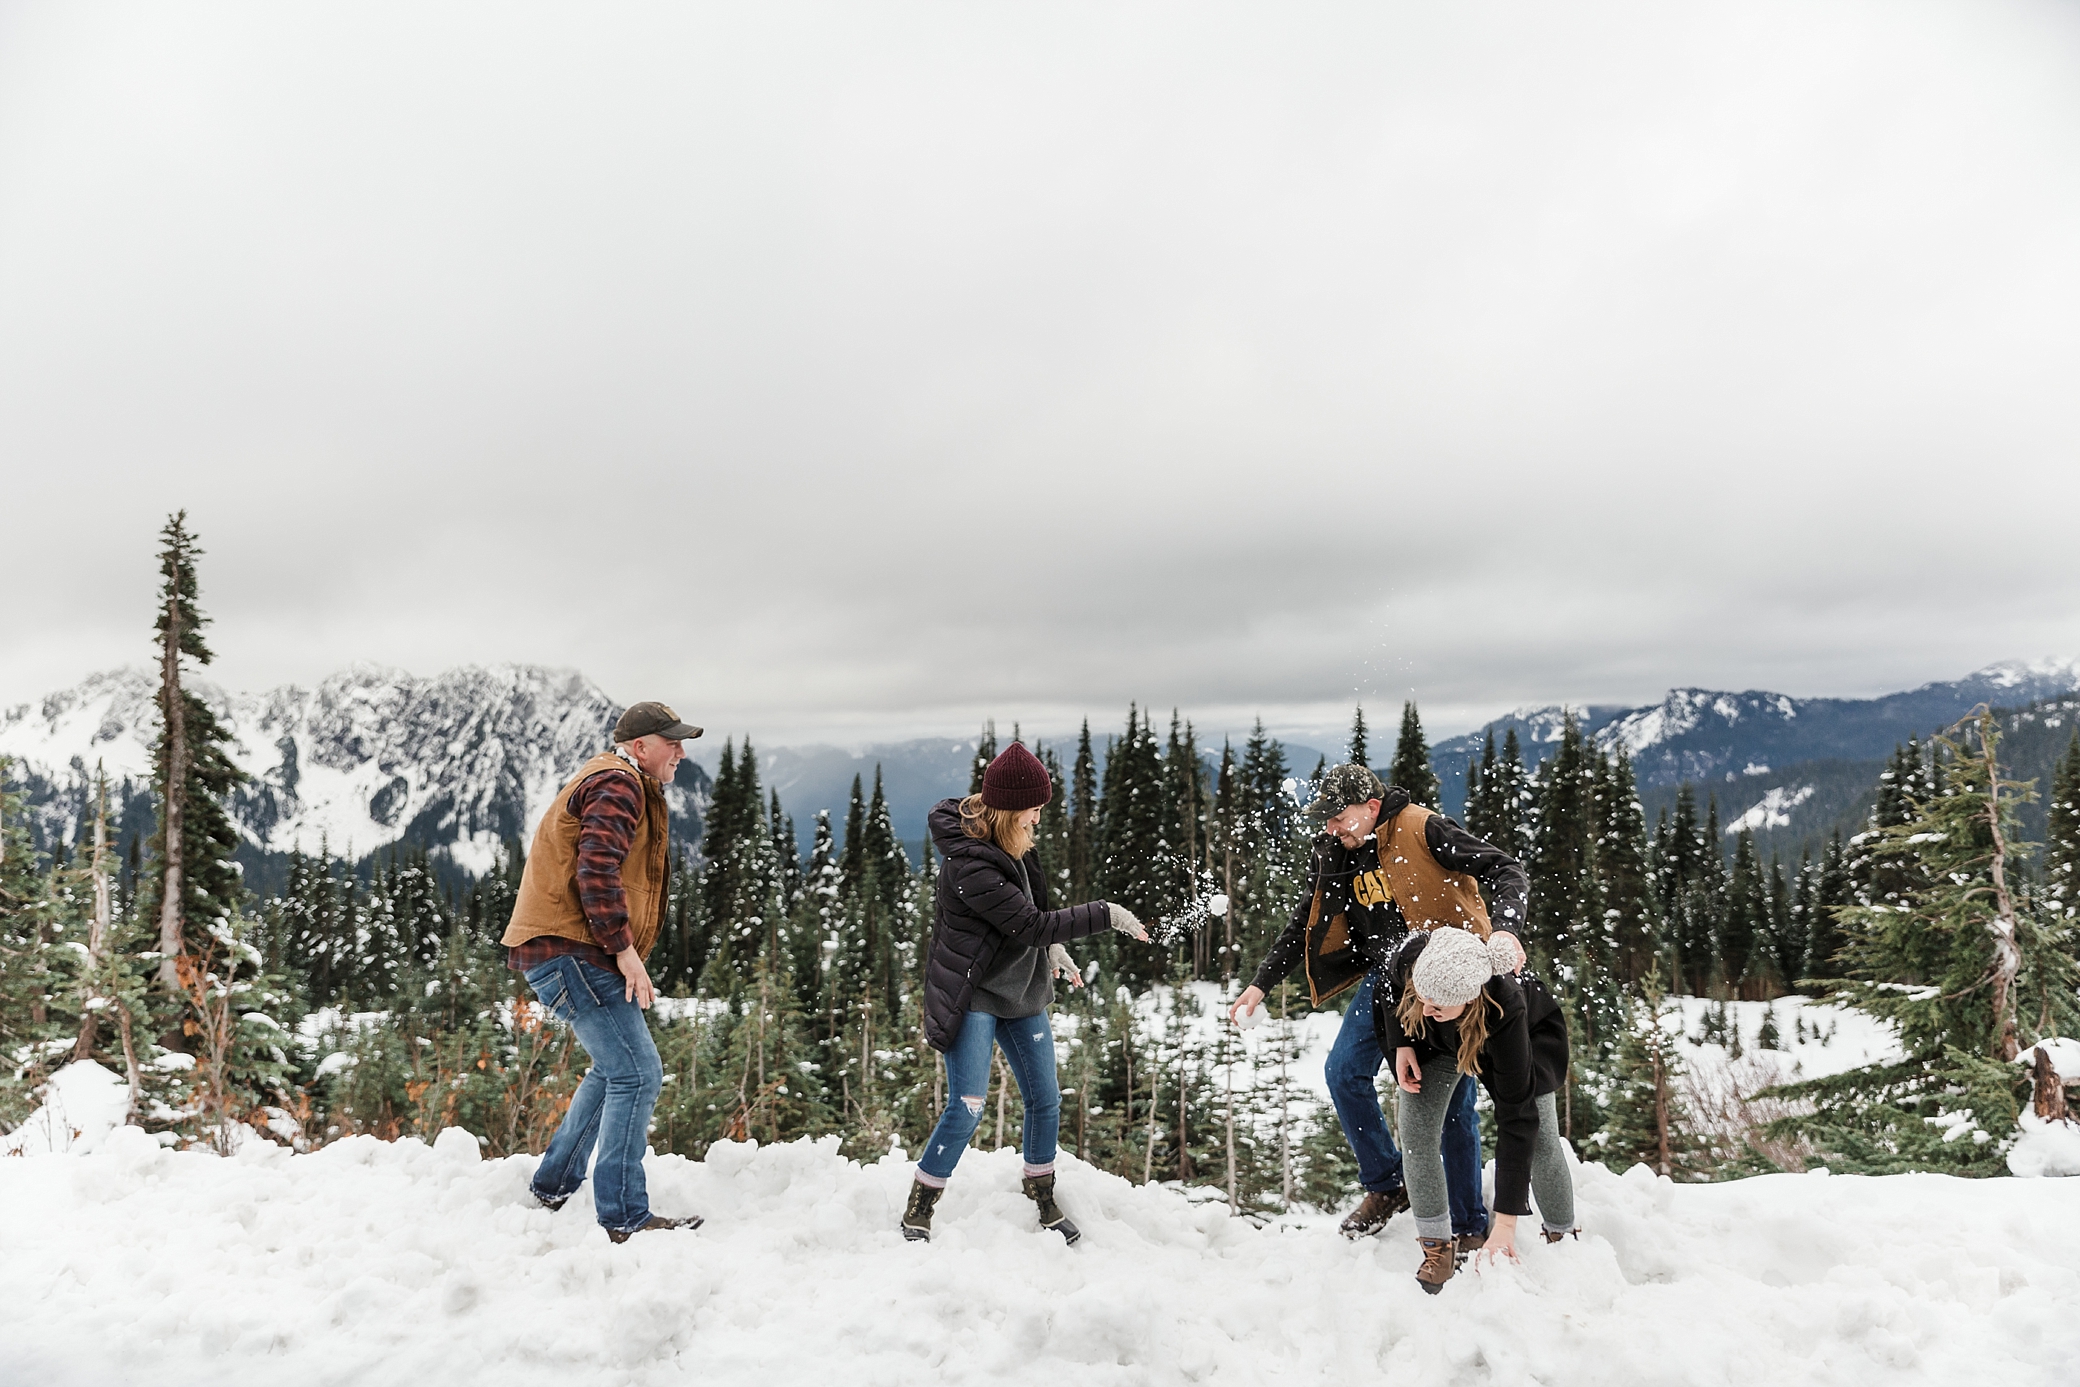 Playing in the Snow at Mt Rainier | Megan Montalvo Photography 